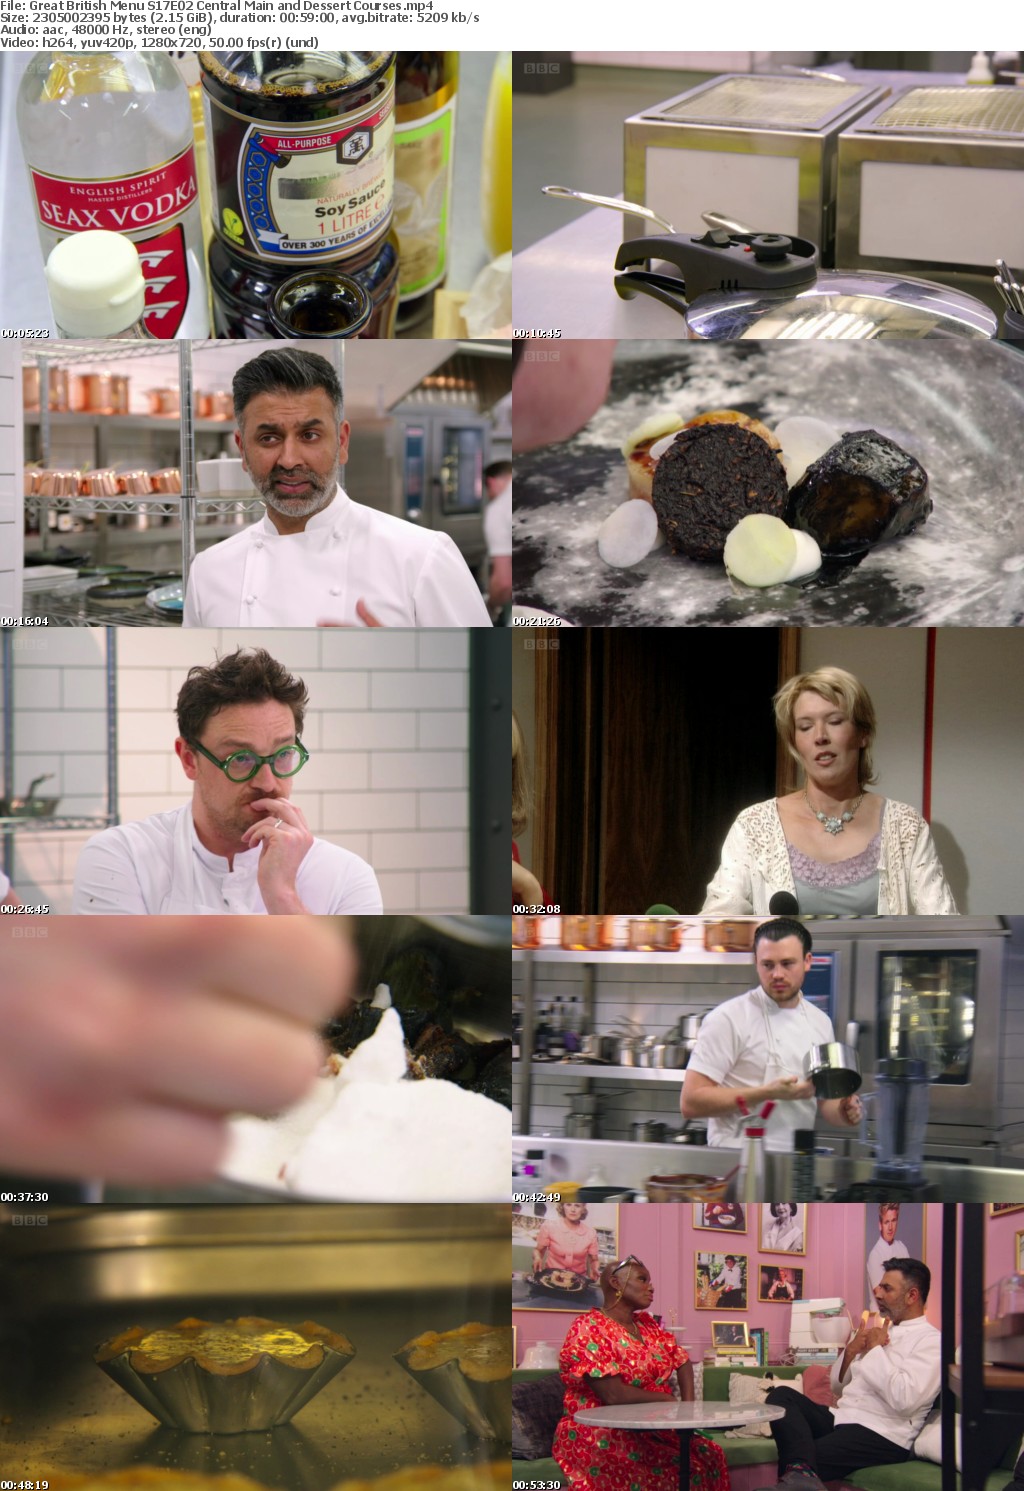 Great British Menu S17E02 Central Main and Dessert Courses (1280x720p HD, 50fps, soft Eng subs)